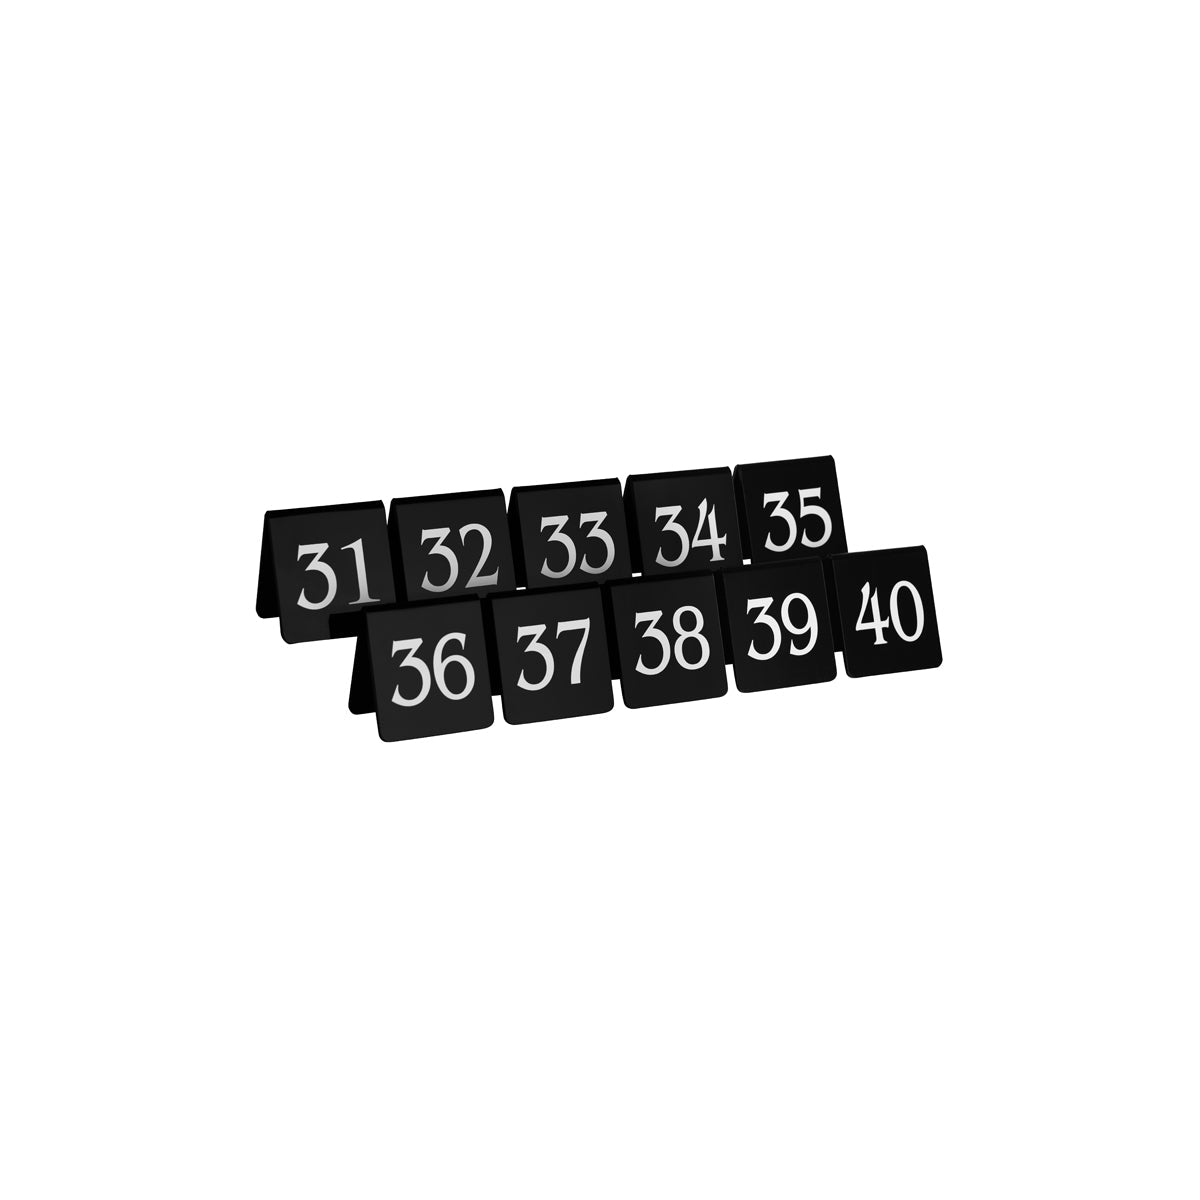 08360BS3 Chef Inox Table Number Set White On Black 31-40 50x55mm Tomkin Australia Hospitality Supplies